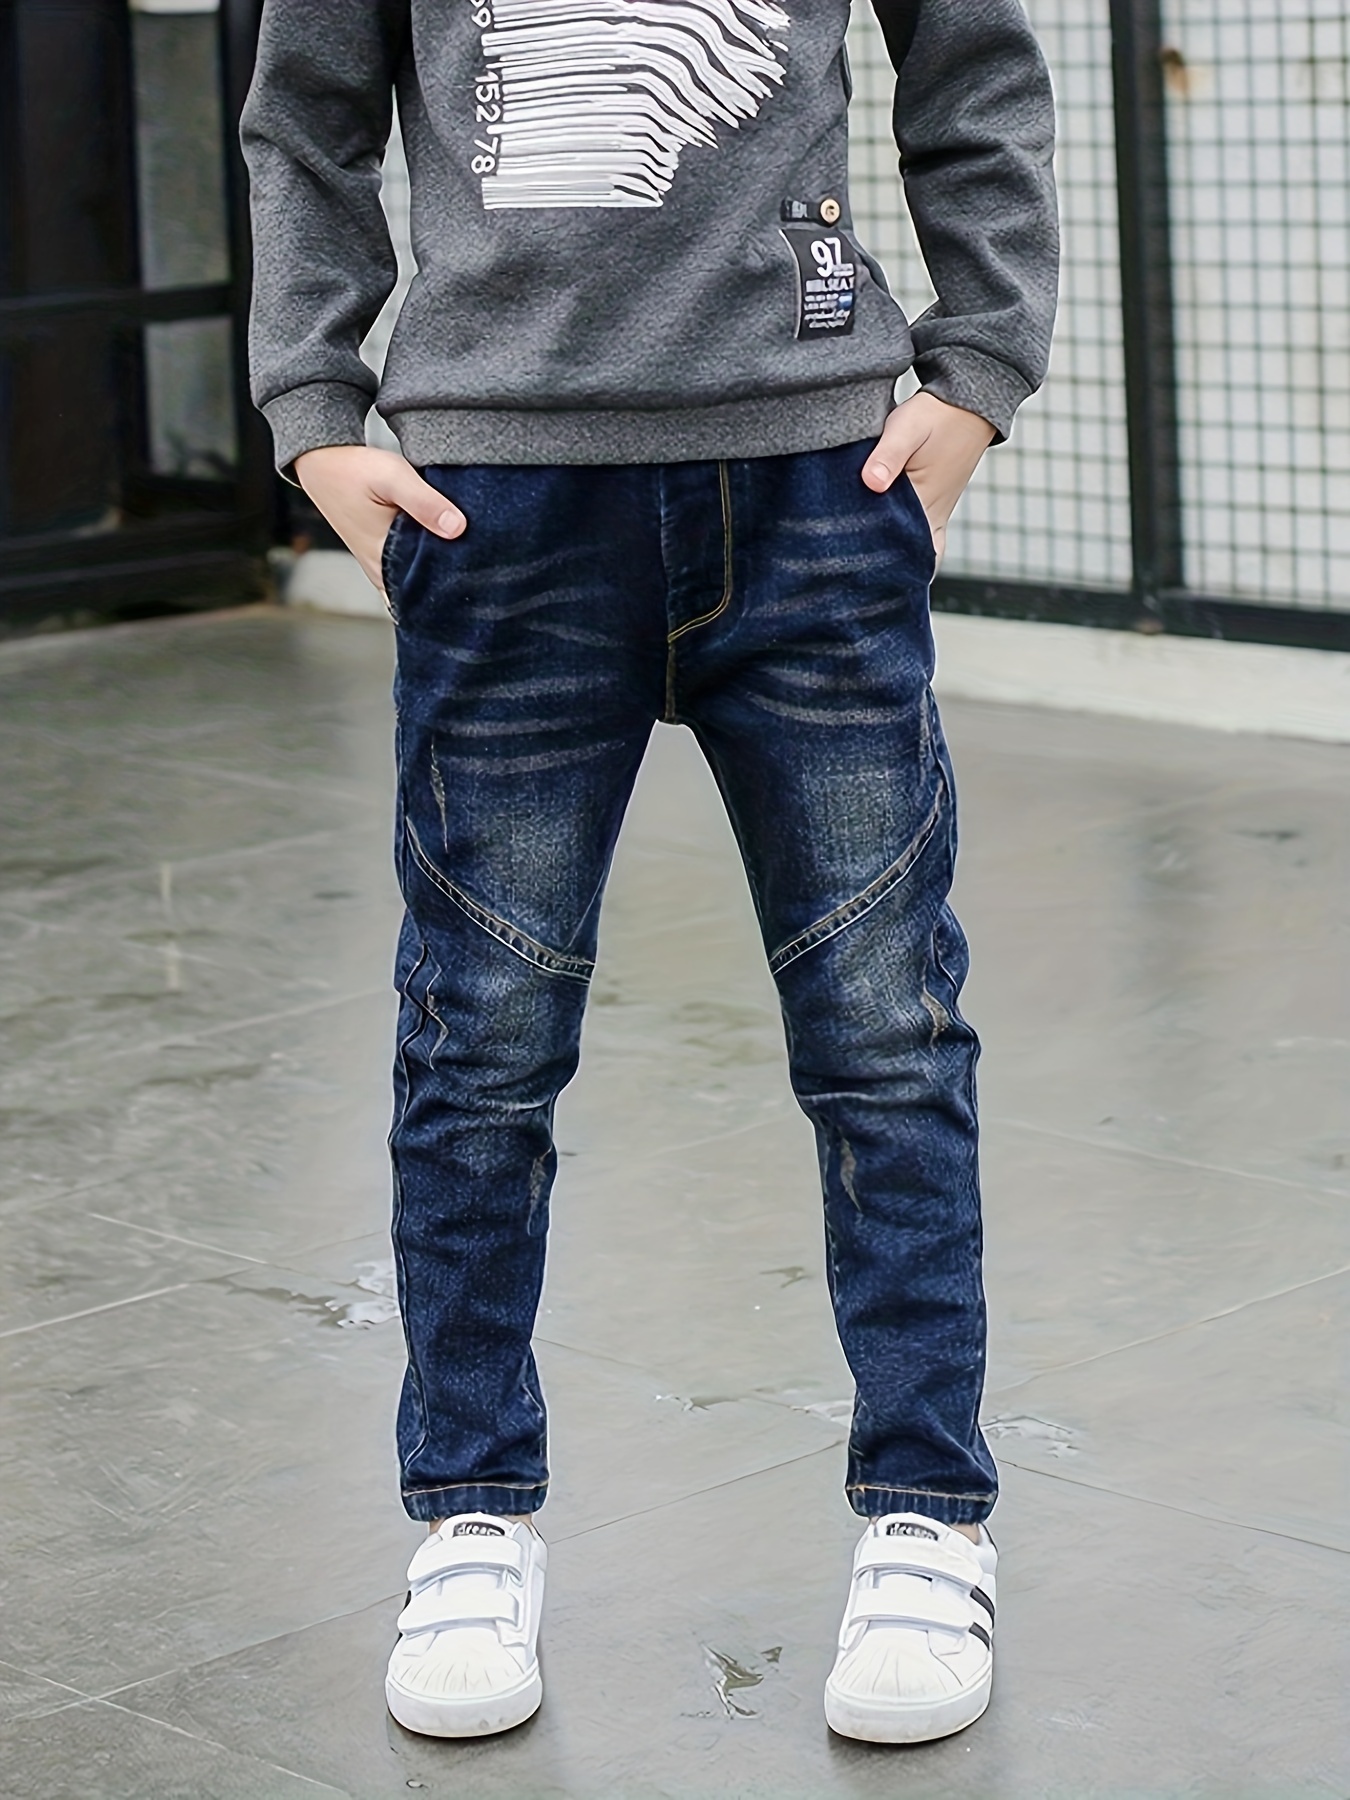 Wholesale Boys jeans spring and autumn new children's trousers trousers in  the big boy stretch pants jeans pants for boys From m.alibaba.com